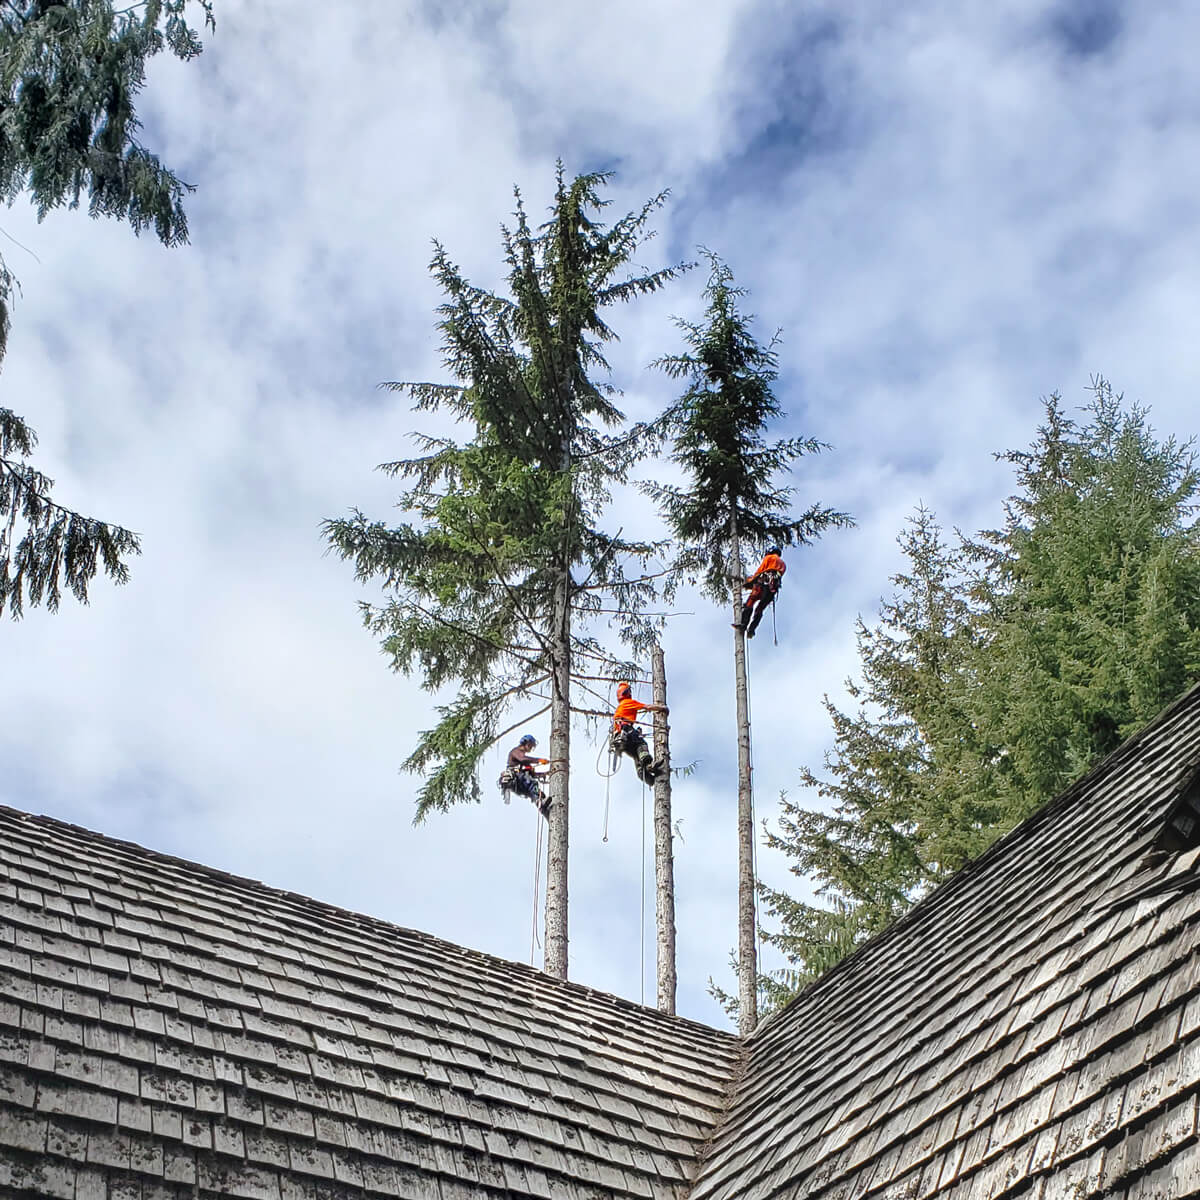 3 Garibaldi Tree employees performing a tree removal service in Whistler, BC. The employees are up 3 tall trees behind a house. It's a sunny day with some clouds in the sky.